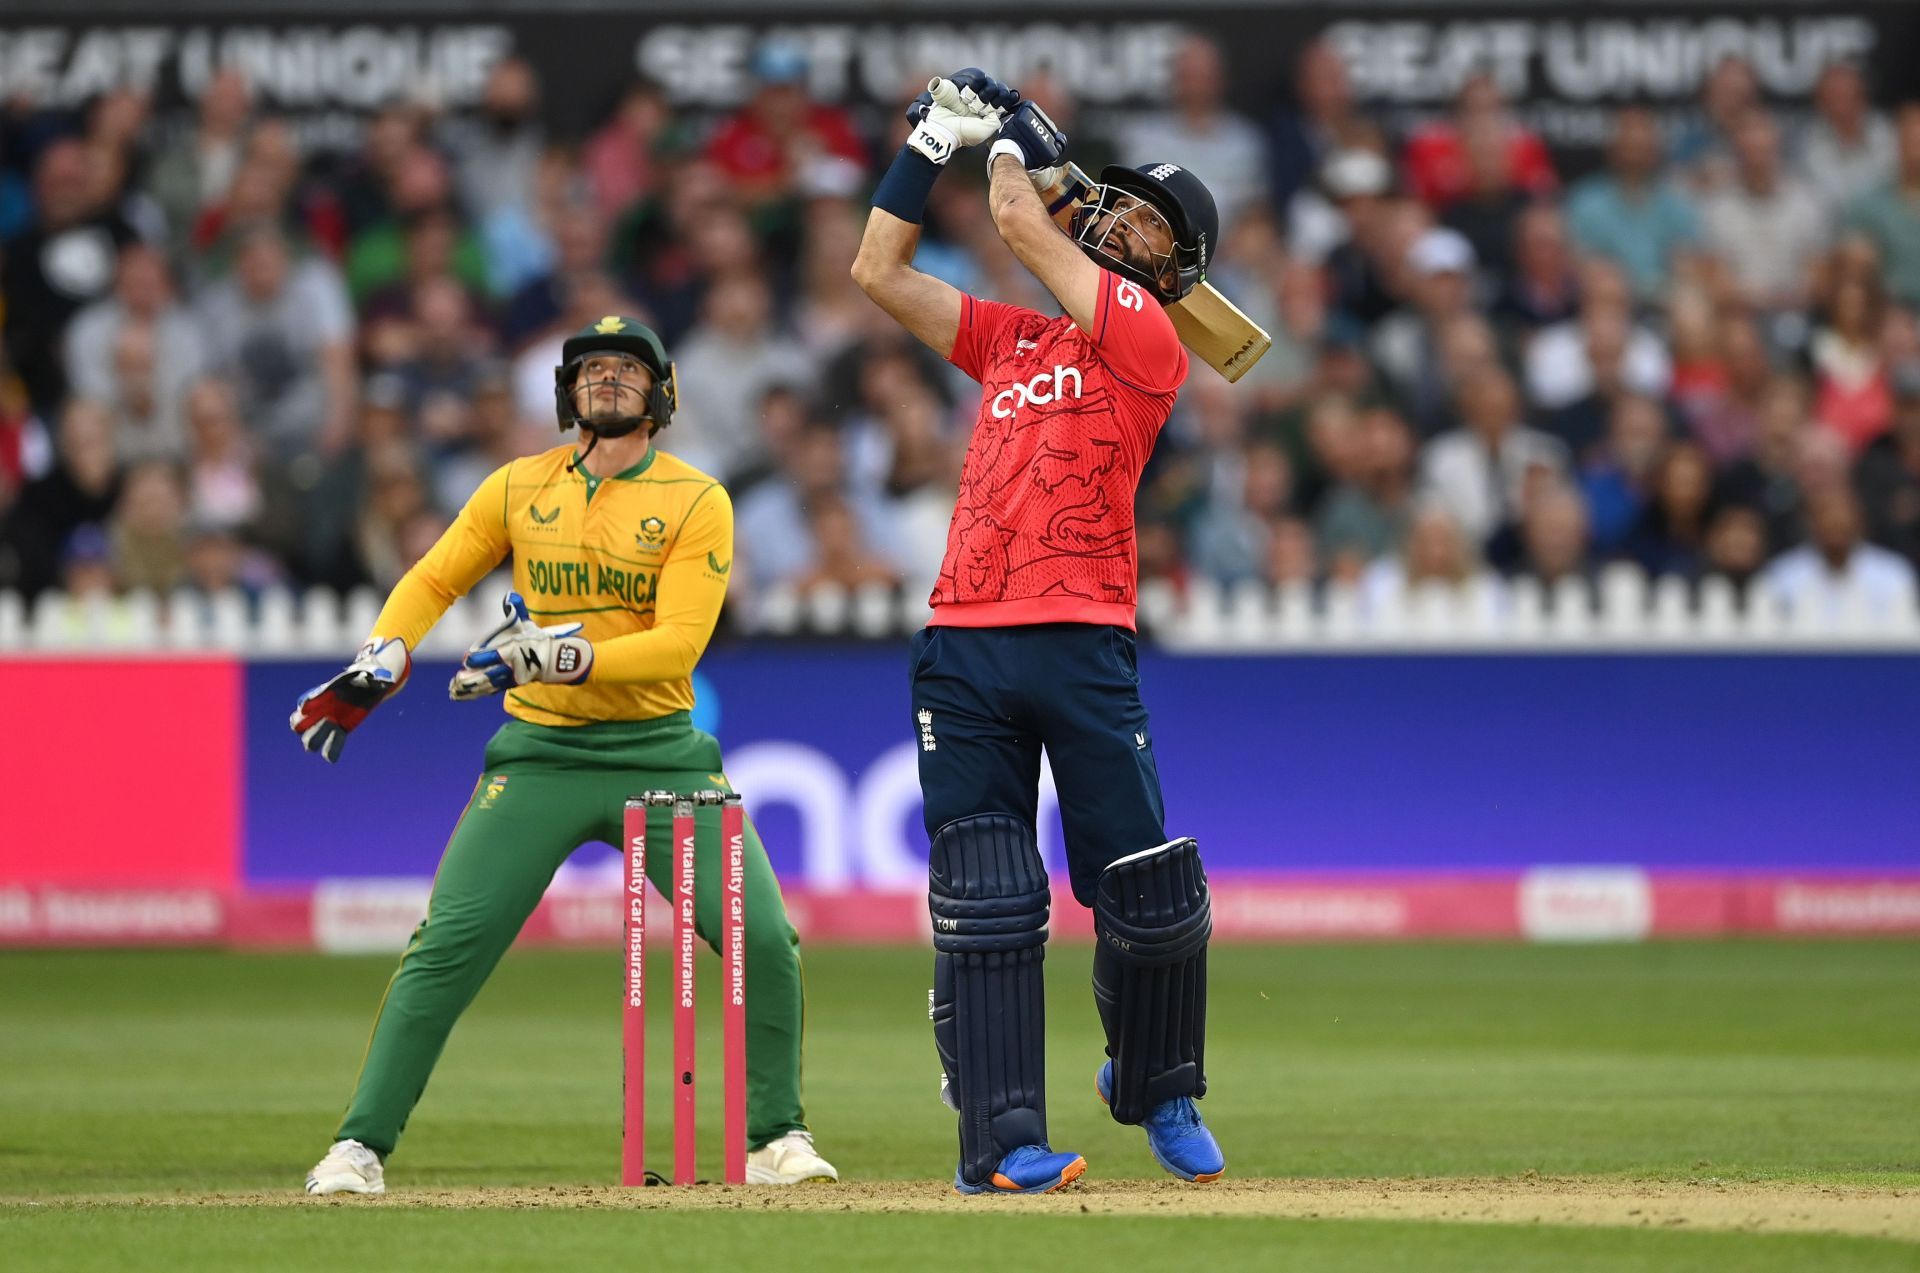 Moeen Ali smashed six sixes in his 18-ball 52. (Credits: Getty)